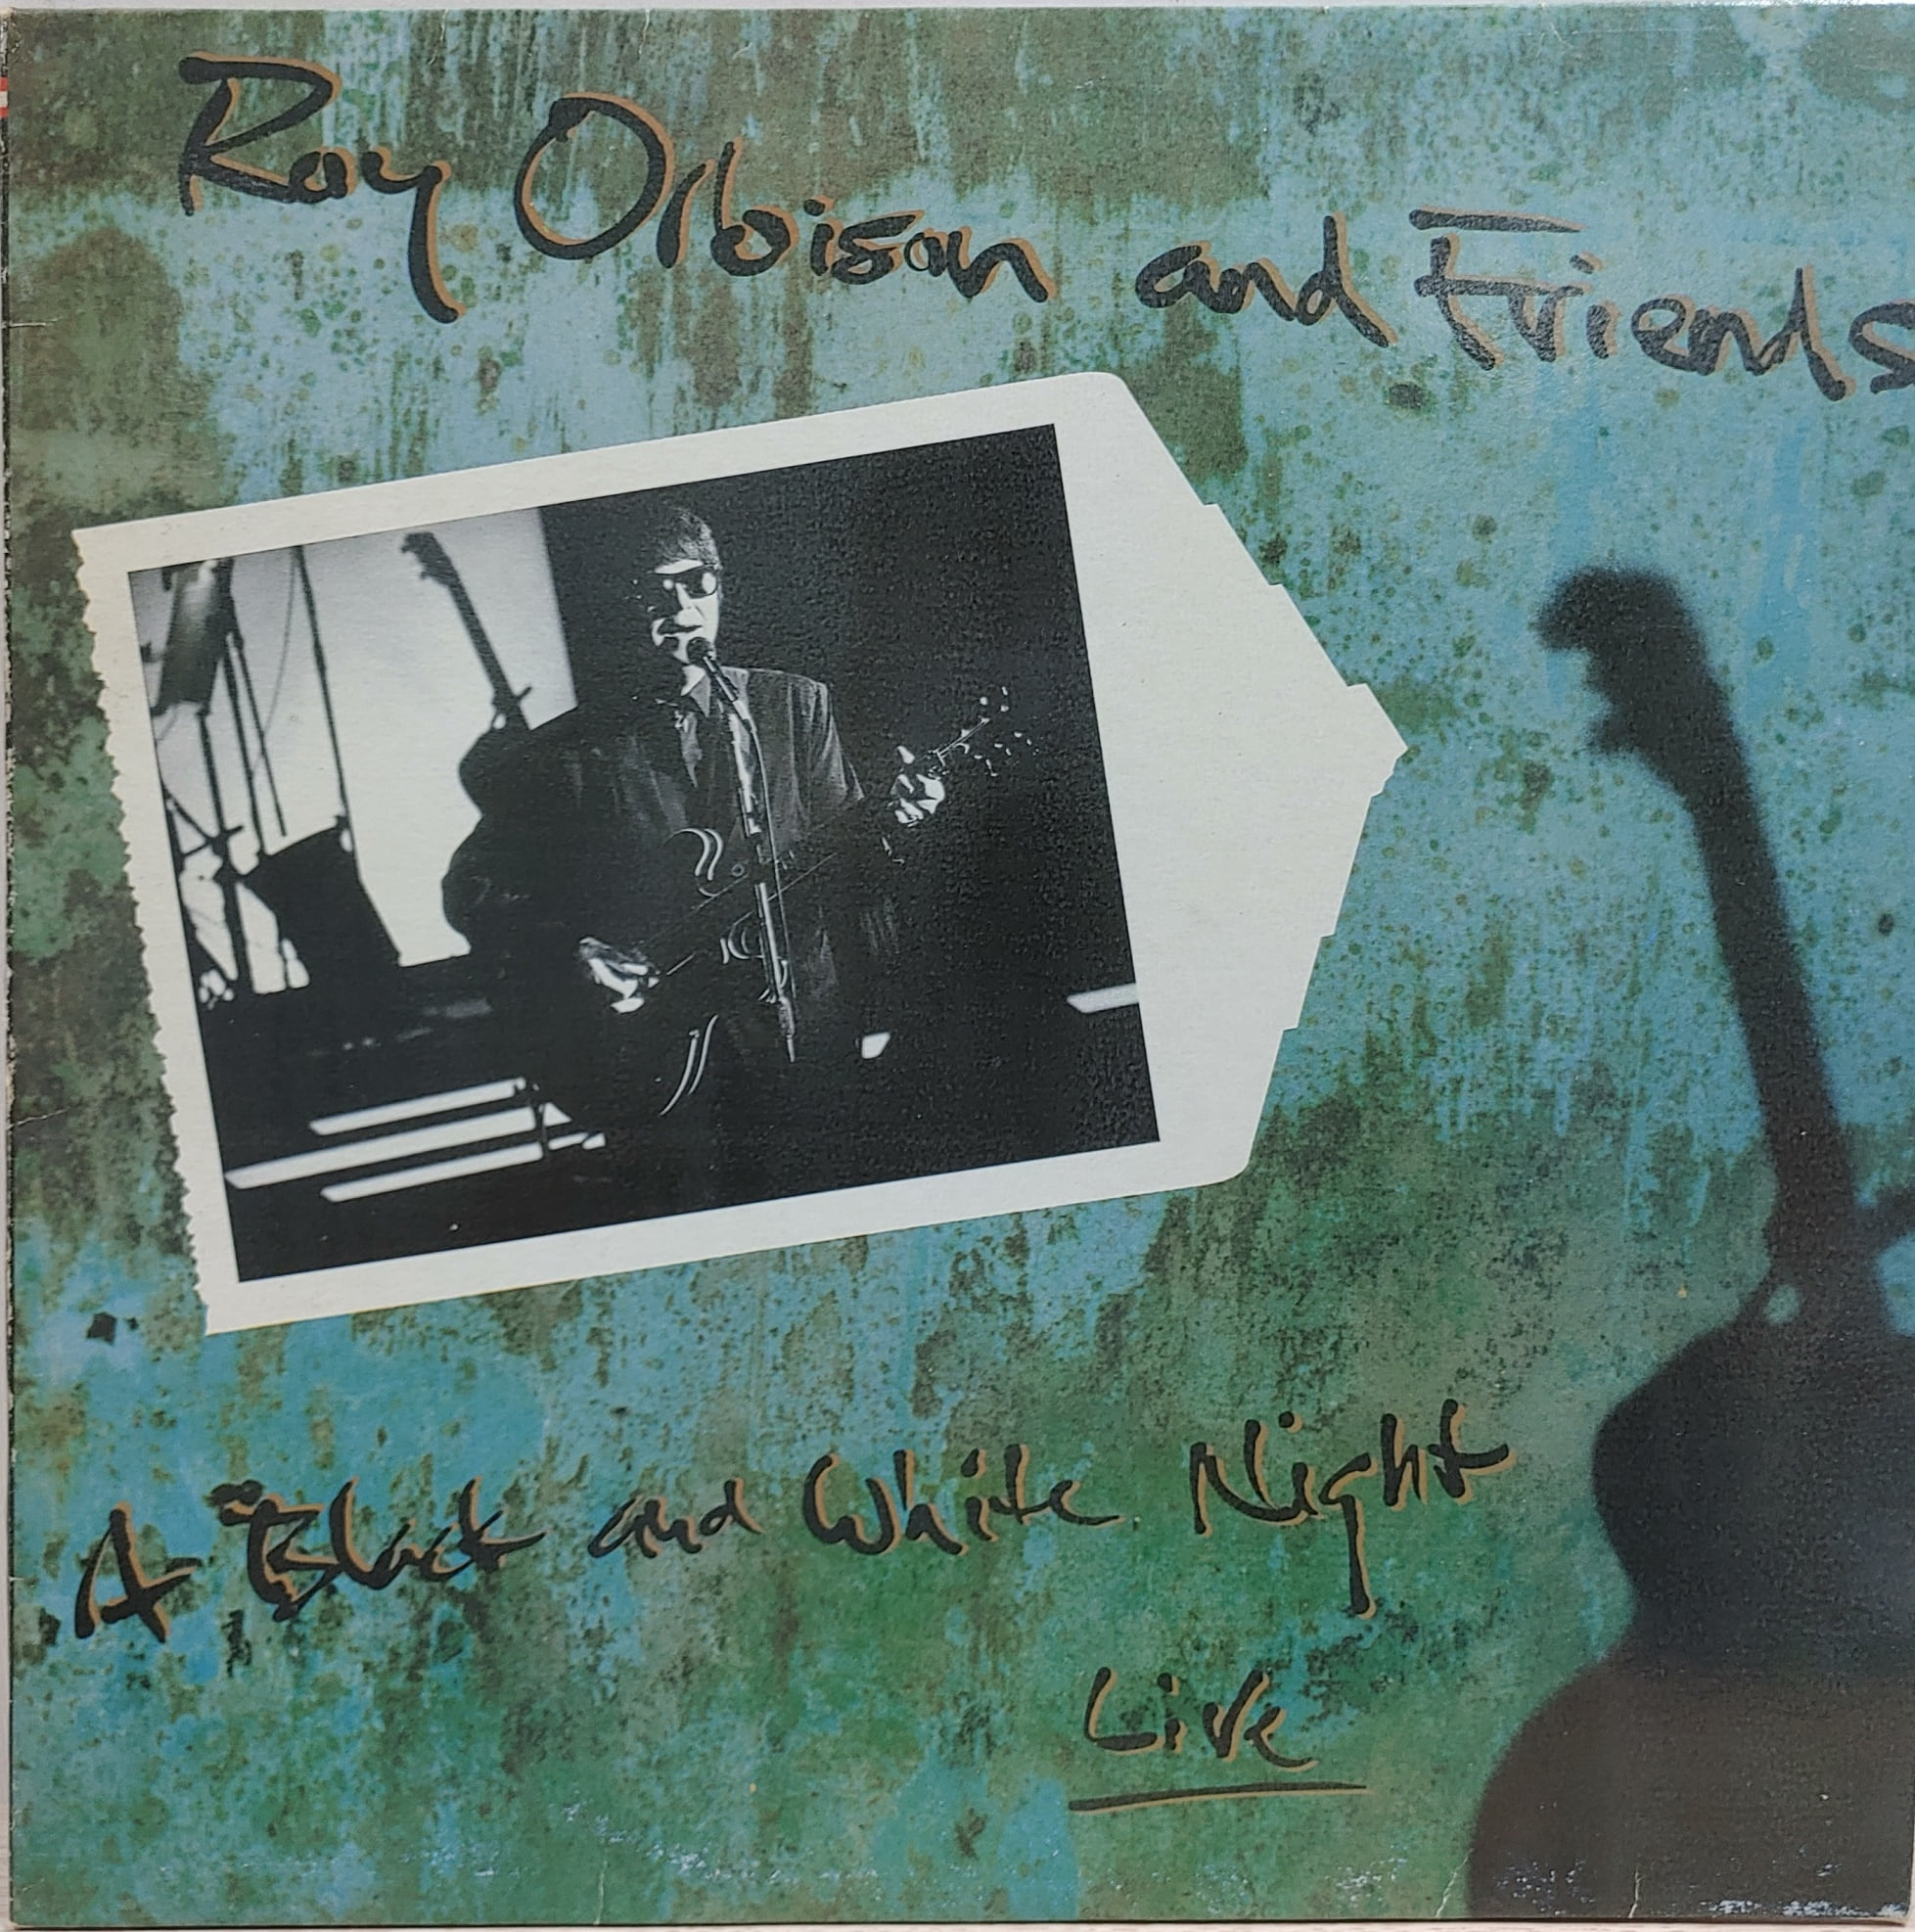 ROY ORBISON AND FRIENDS / A BLACK AND WHITE NIGHT LIVE